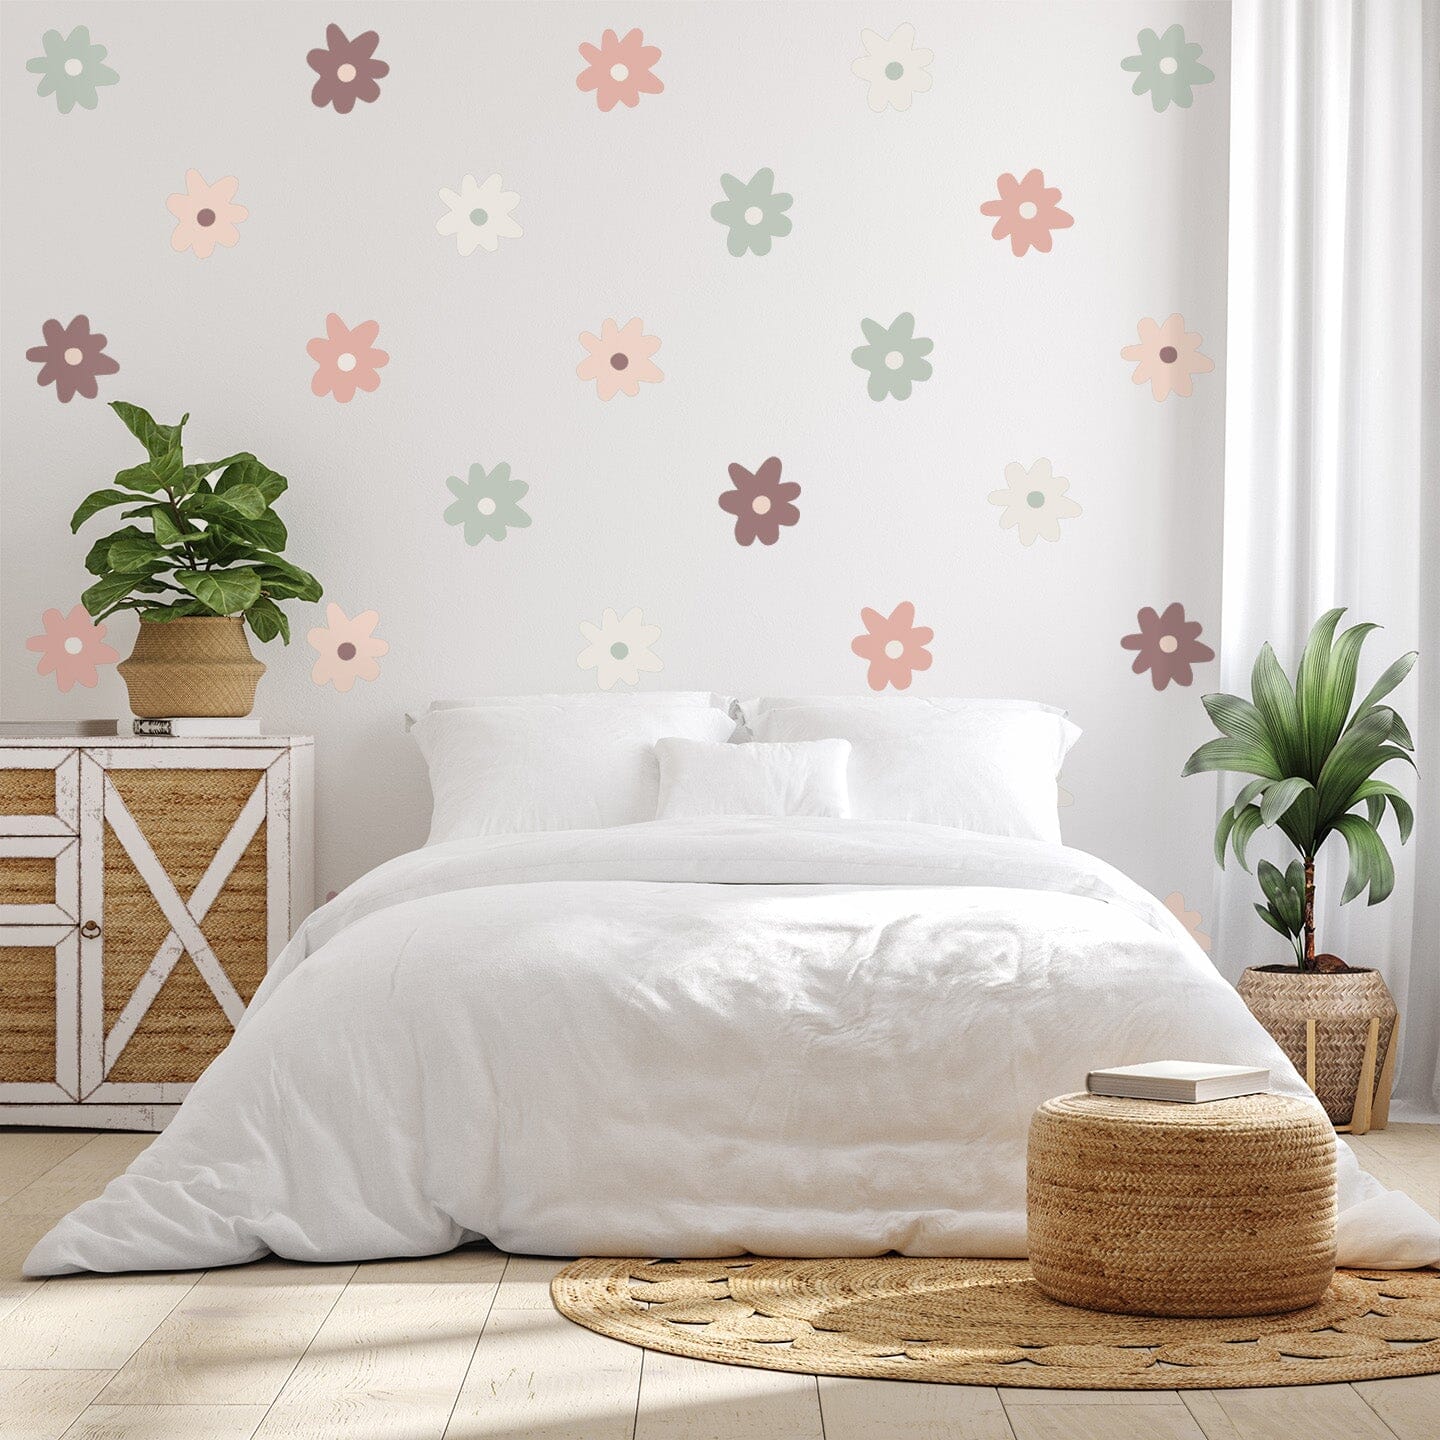 Blush Whimsy Daisy Wall Decals